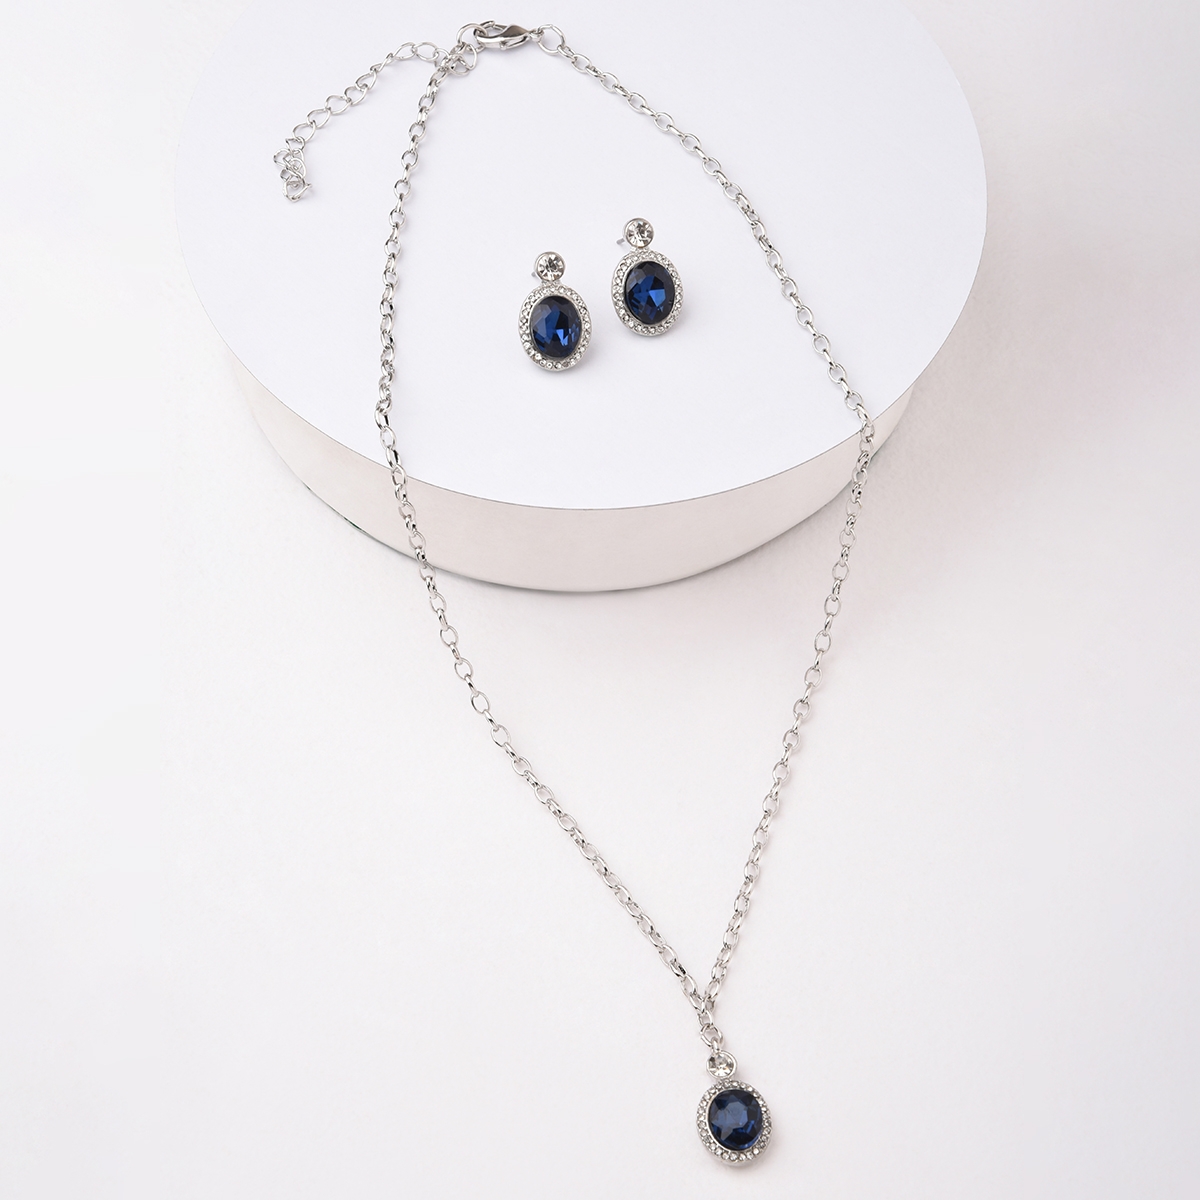 Lilly & sparkle | Lilly & Sparkle Silver Toned Chain With Oval Blue Stone Pendant And Stud Earrings